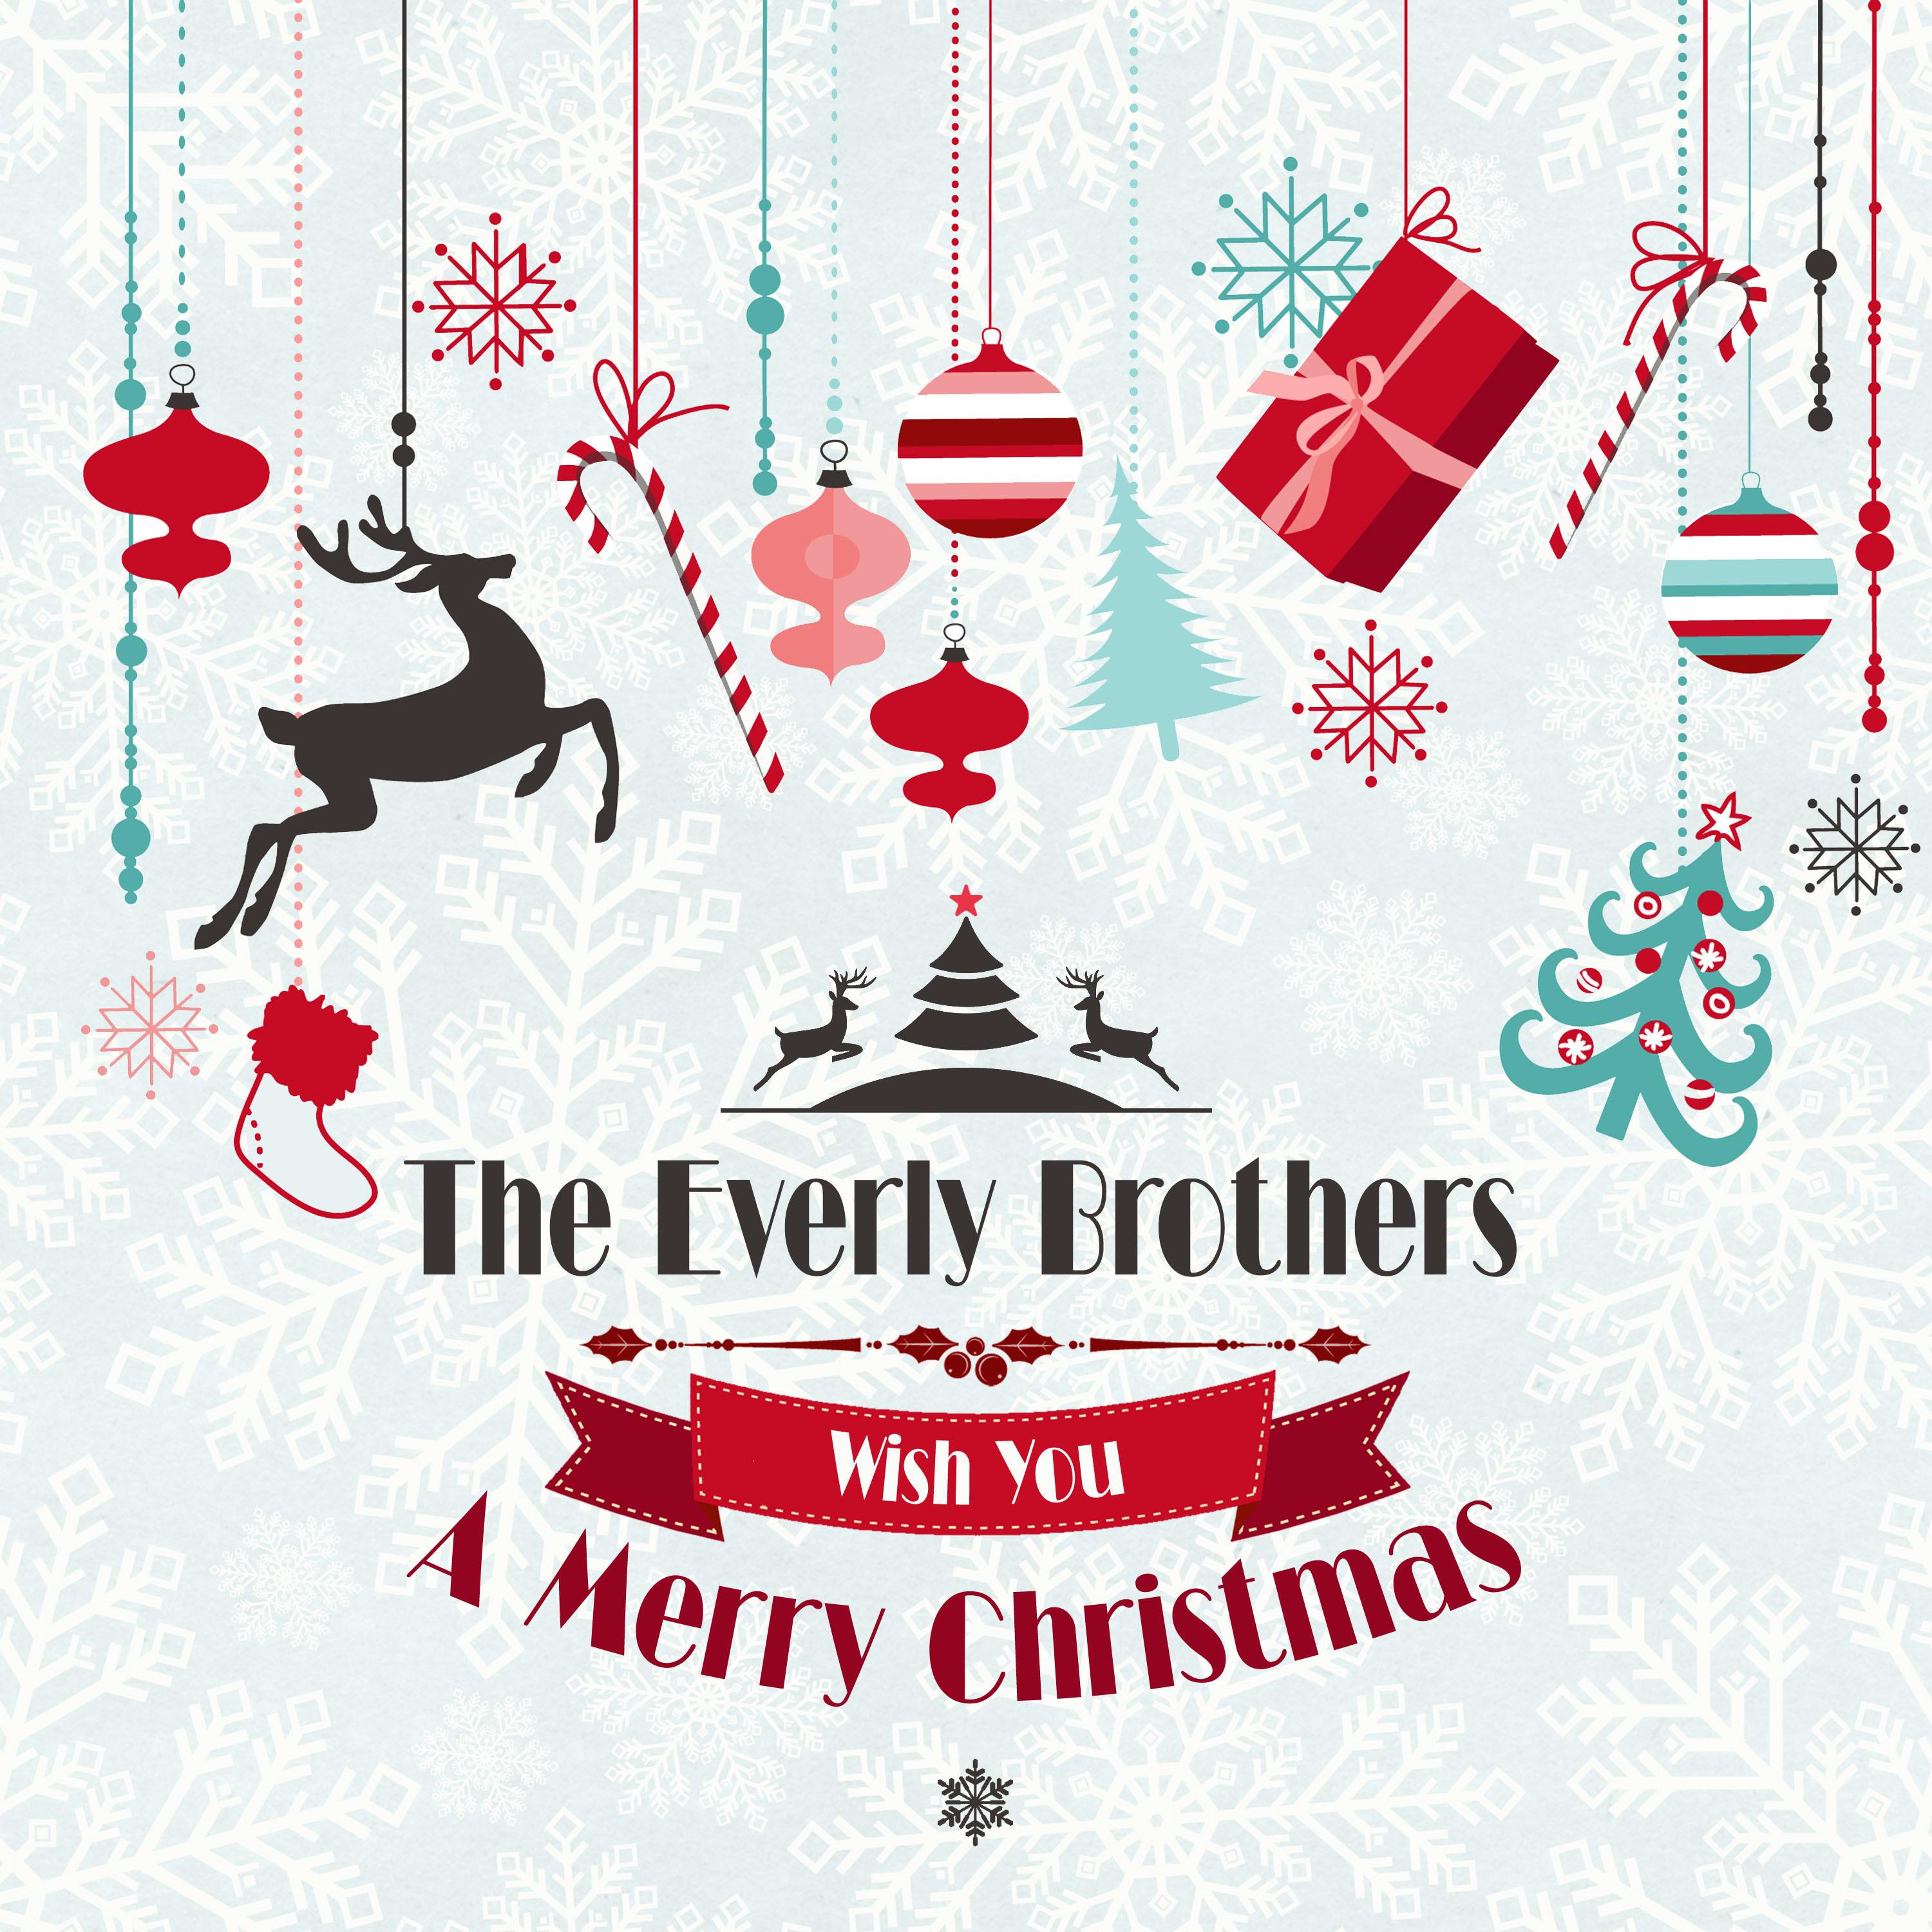 The Everly Brothers Wish You a Merry Christmas